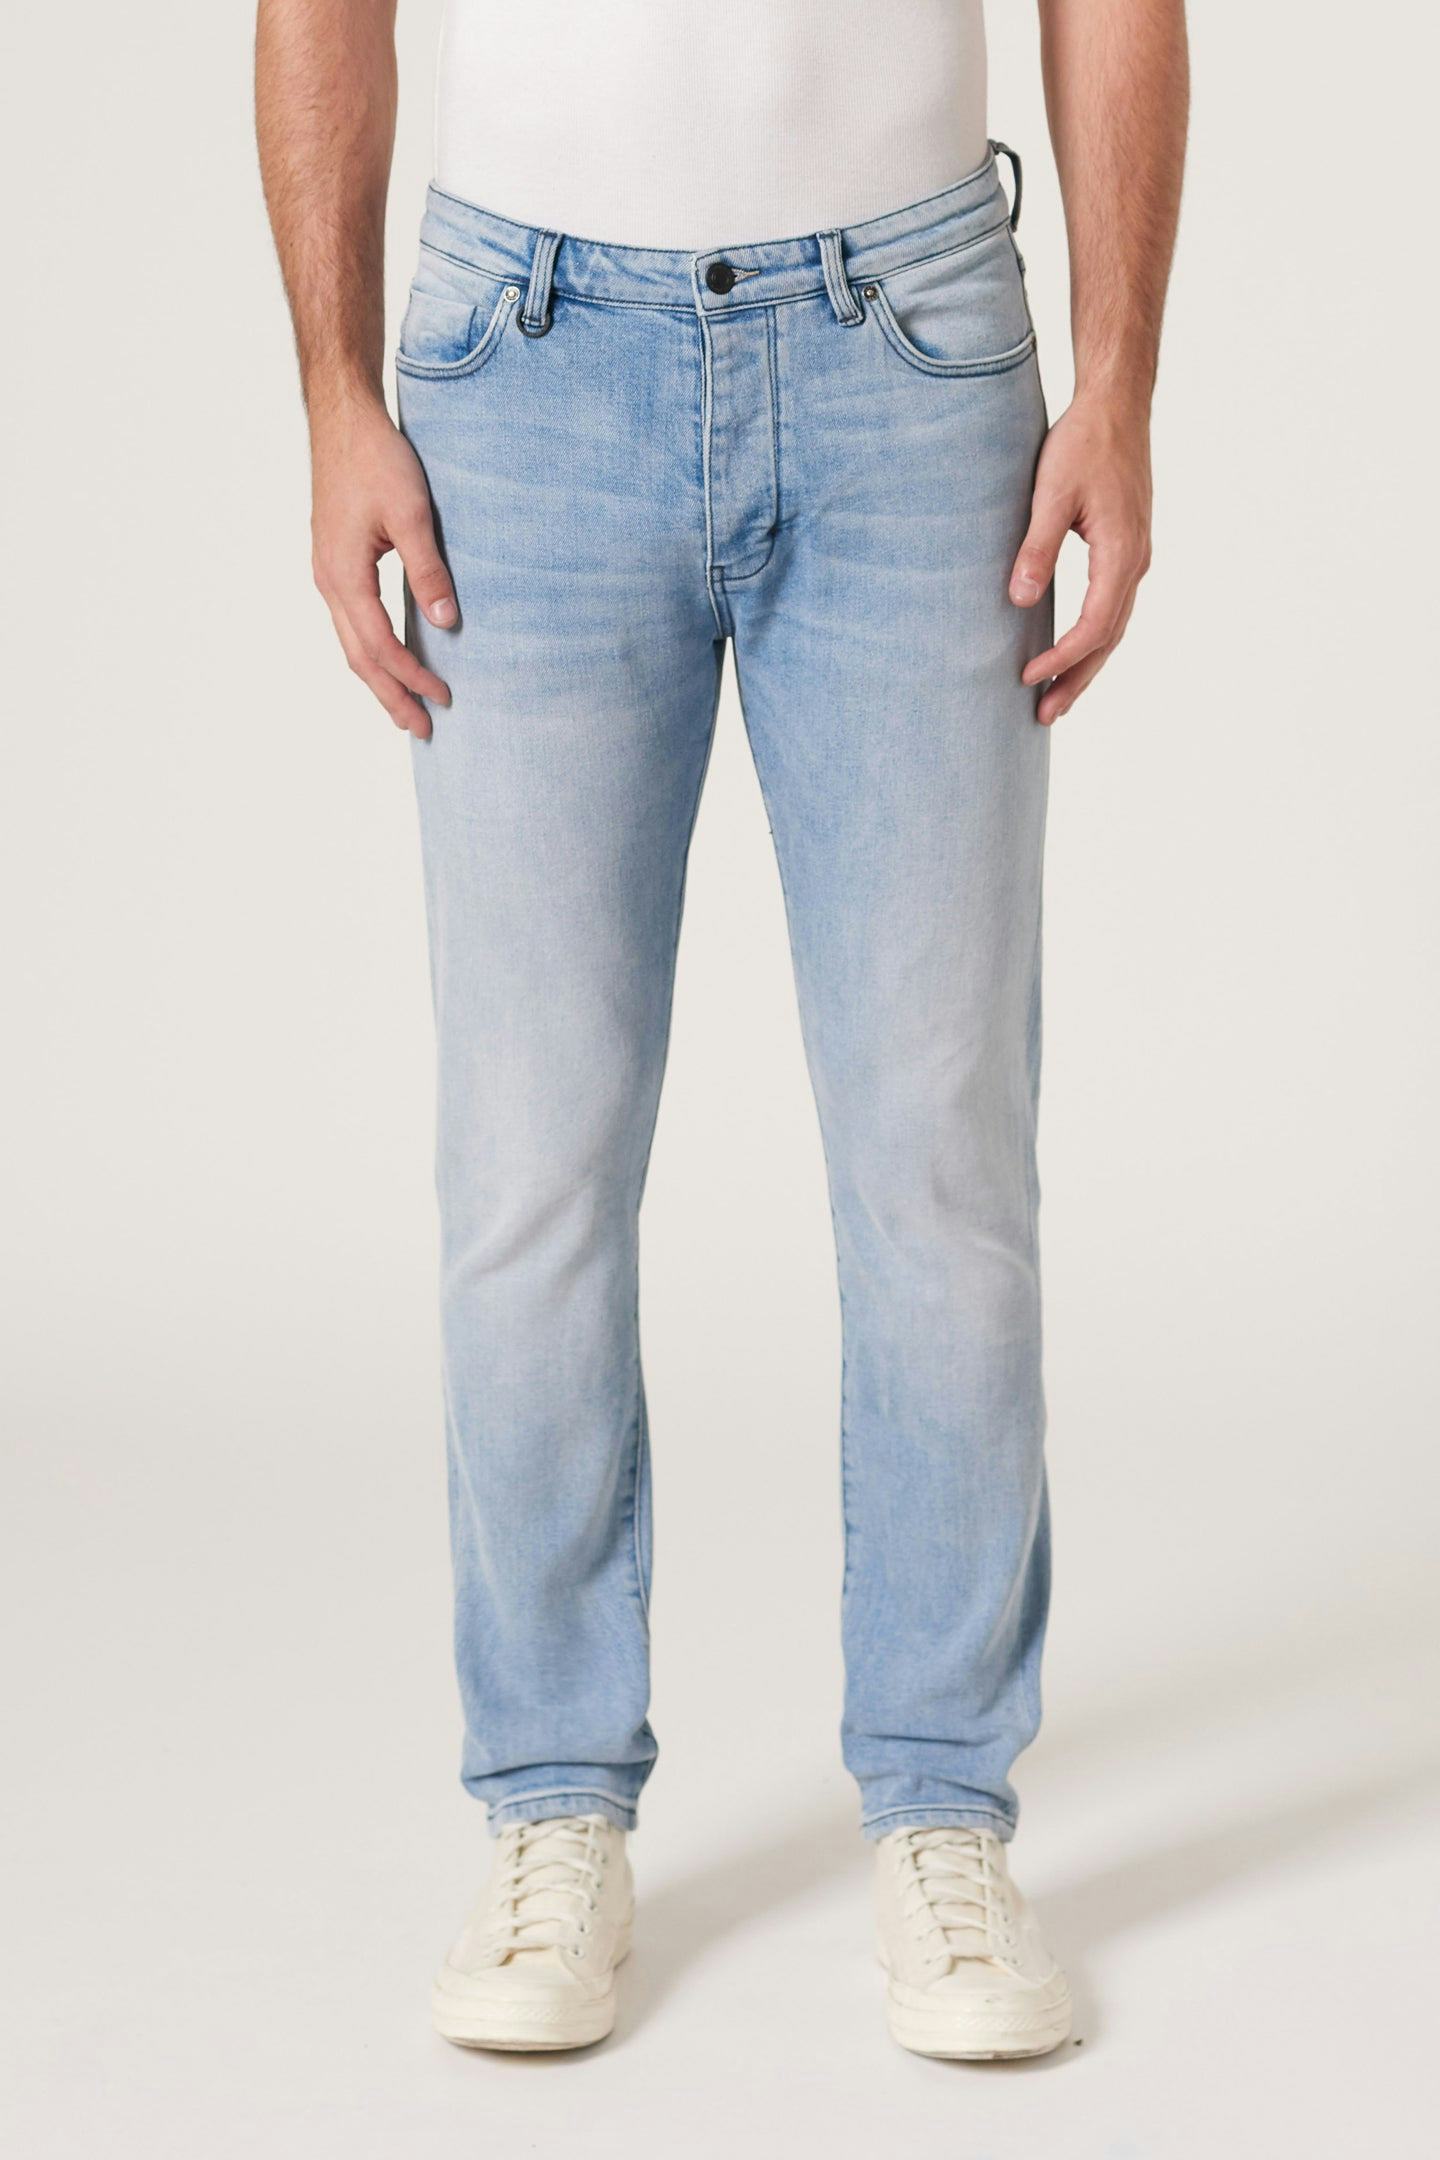 Ray Tapered - Supersonic Neuw light mens-jeans 